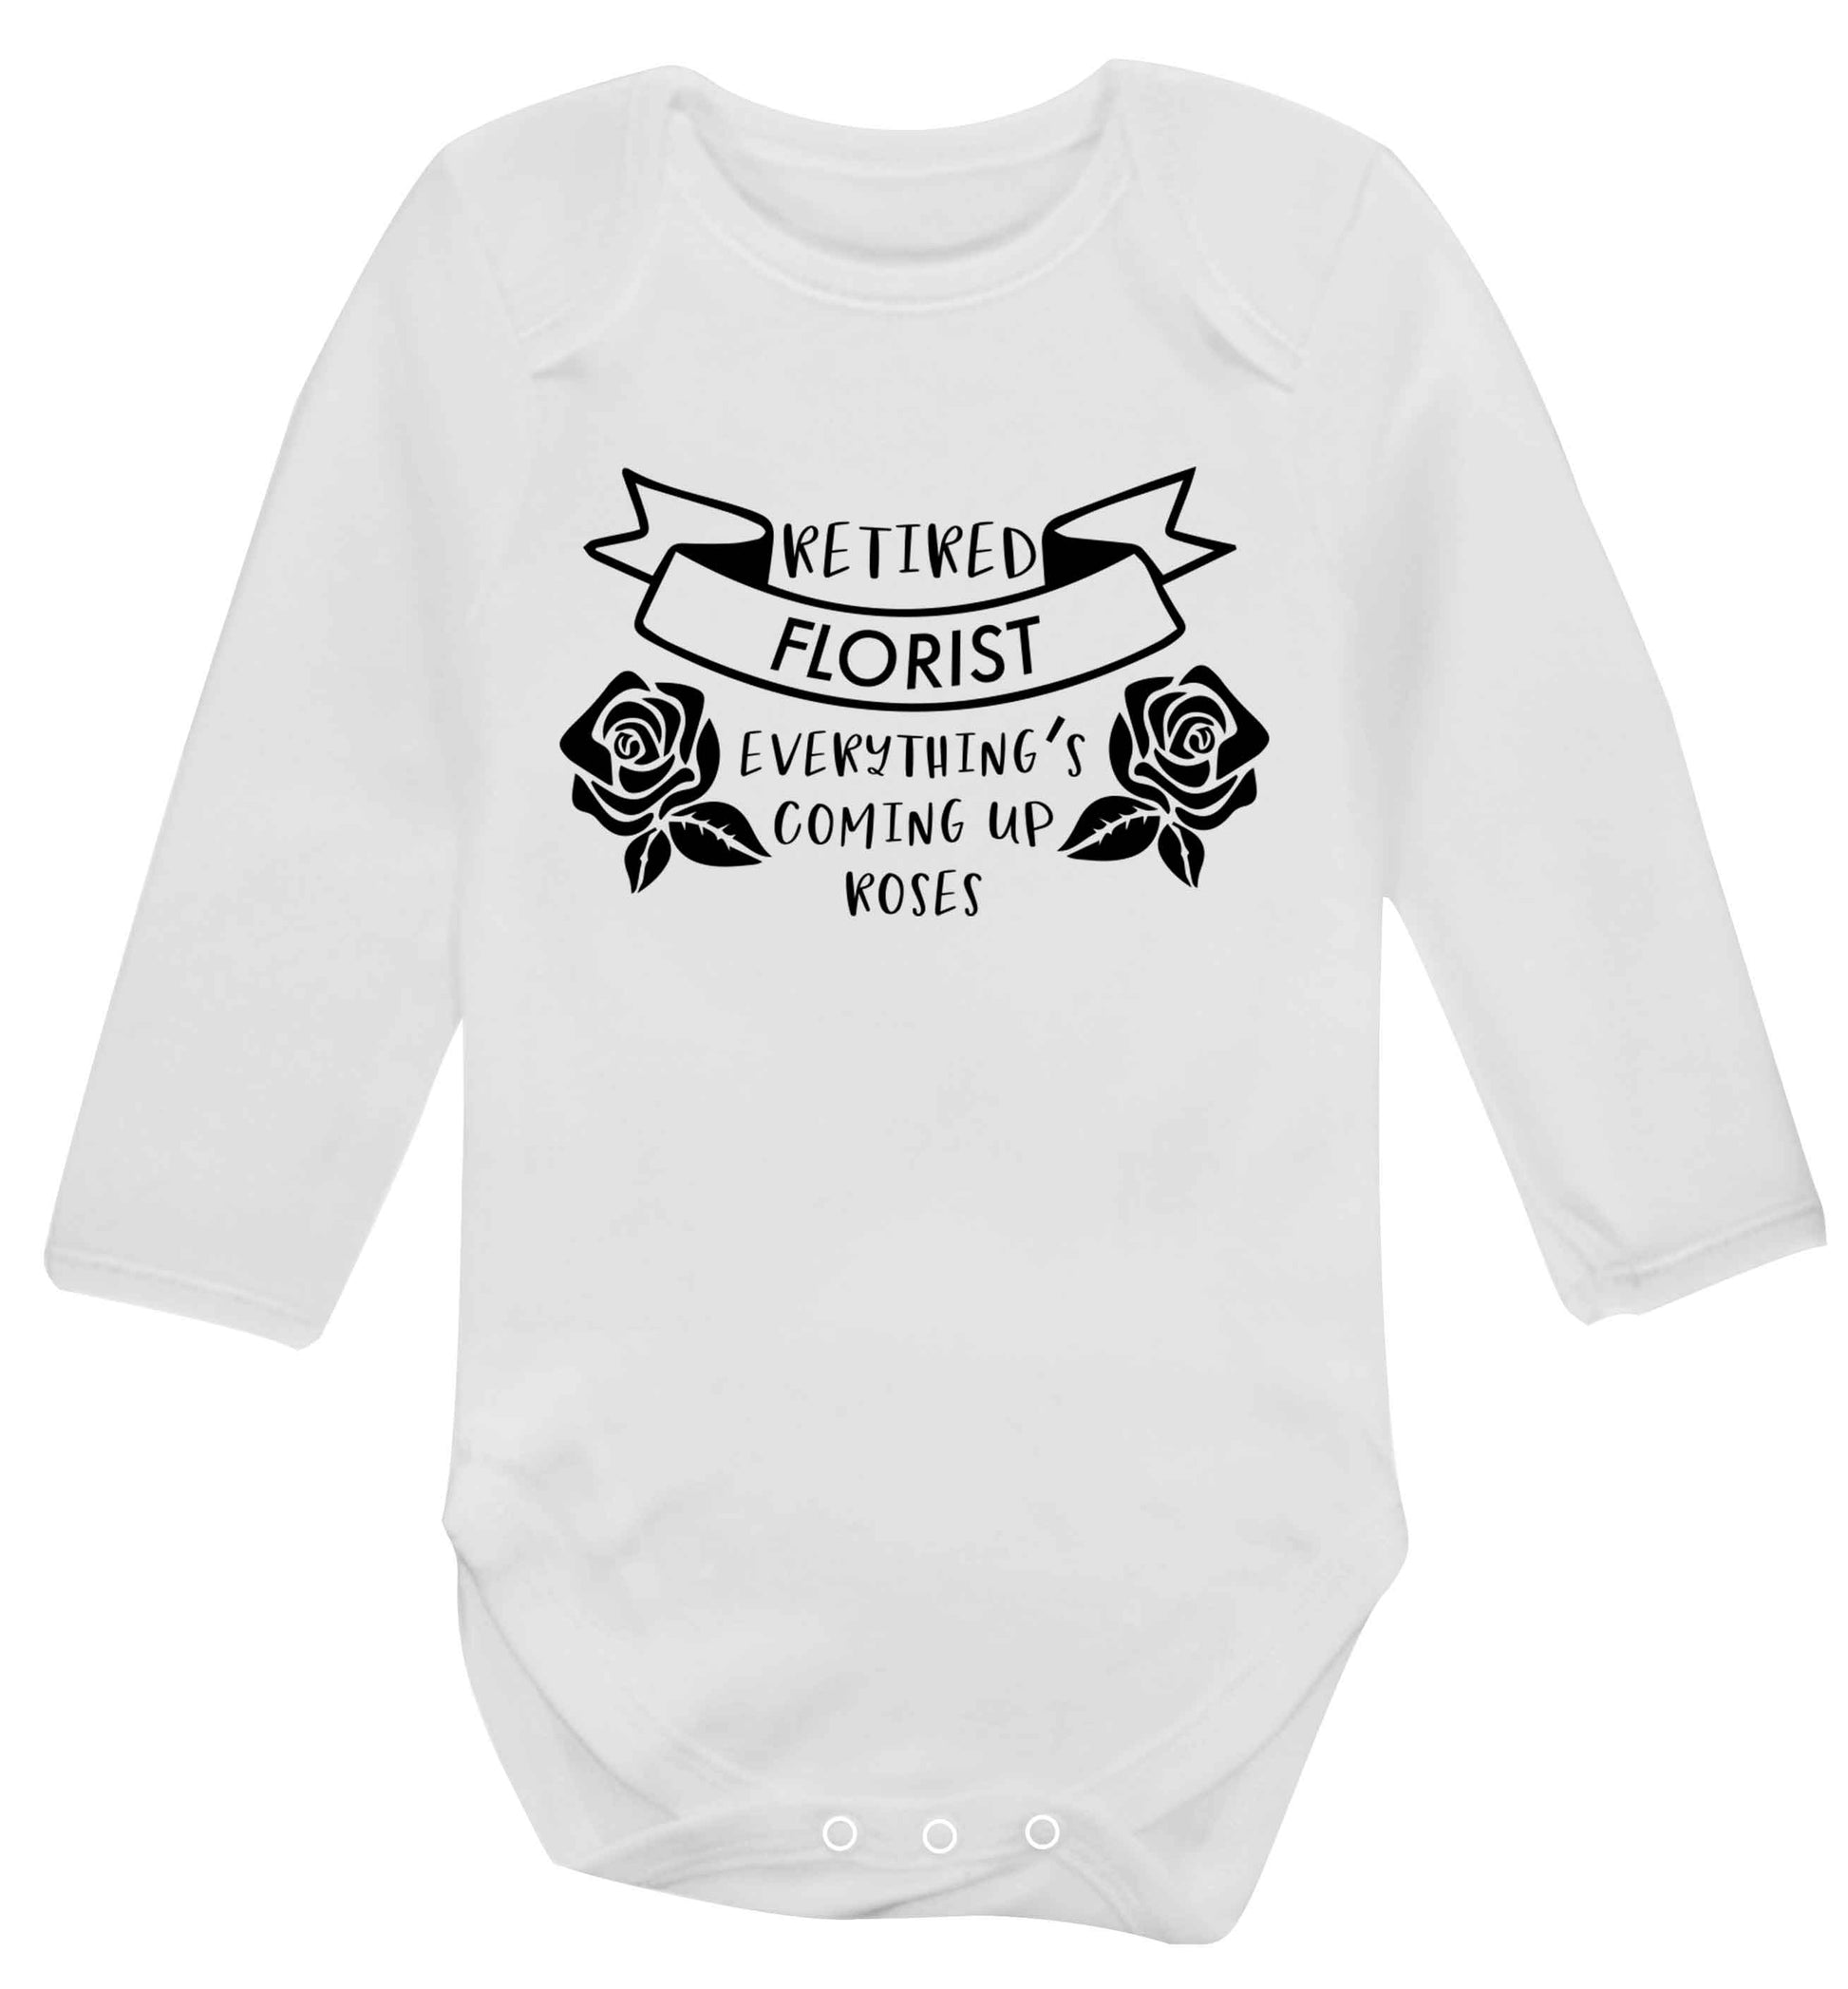 Retired florist everything's coming up roses Baby Vest long sleeved white 6-12 months